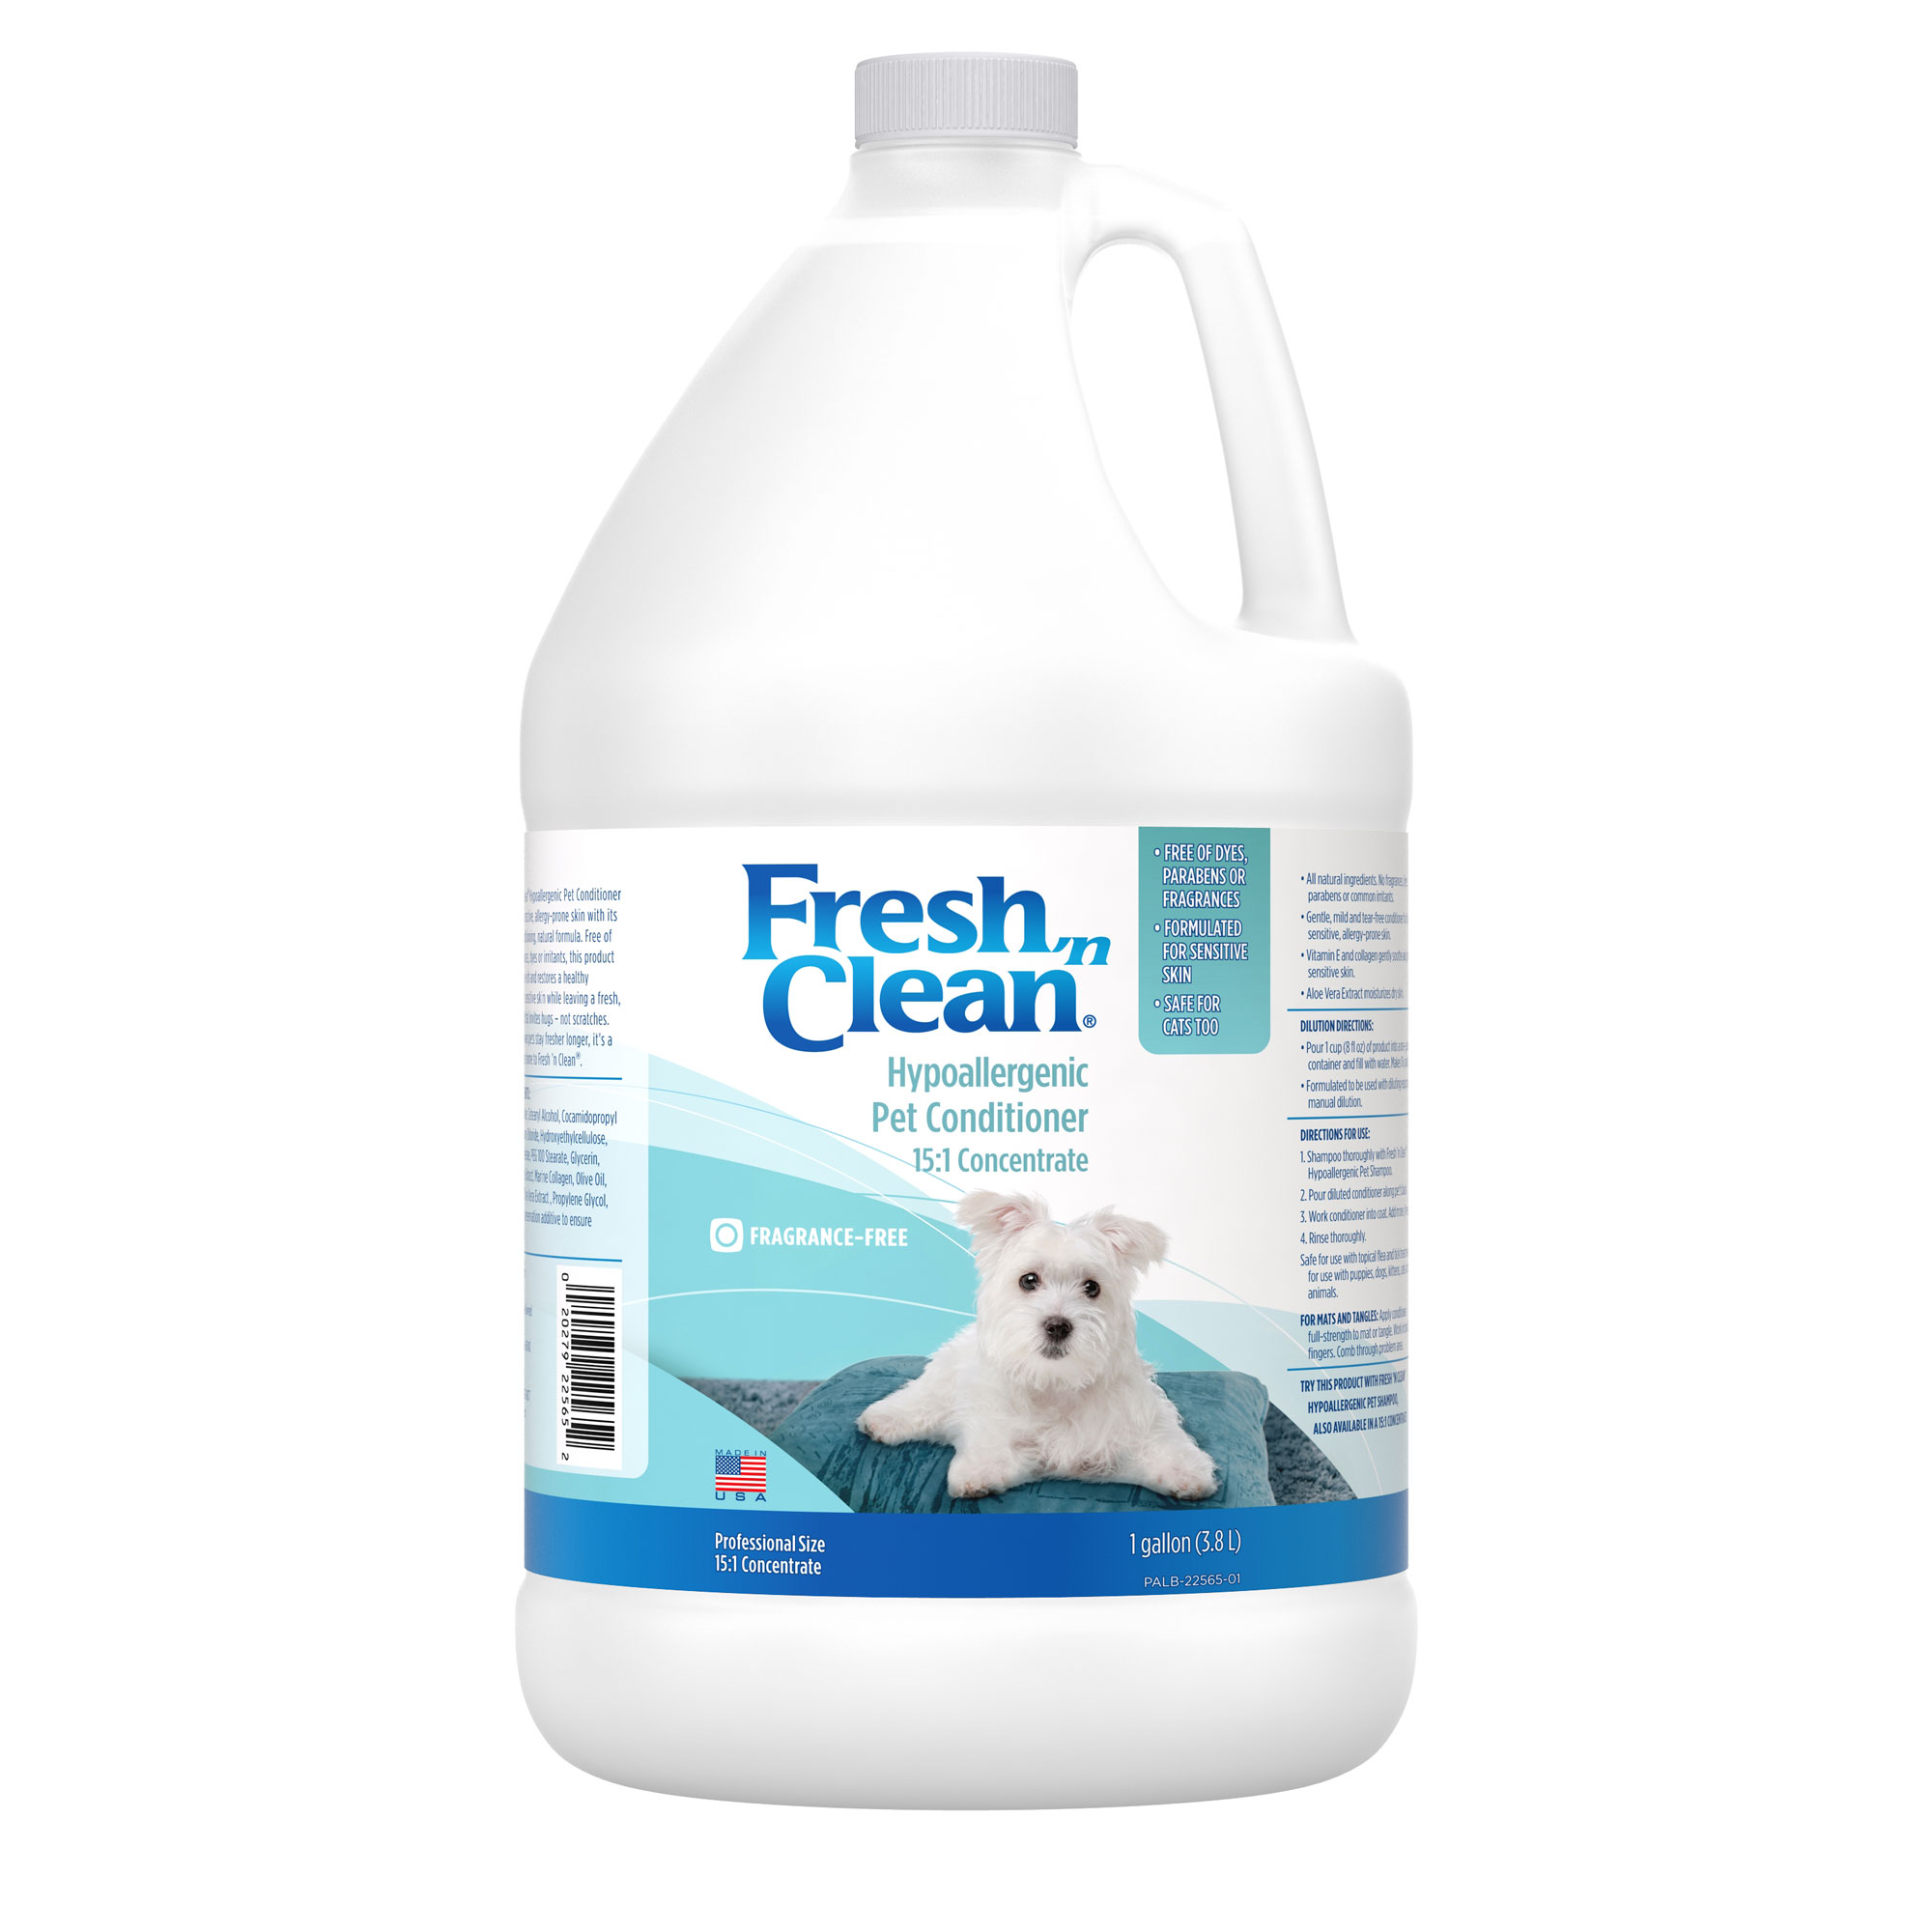 fresh n clean hypoallergenic pet conditioner 15:1 concentrate gallon for dog grooming